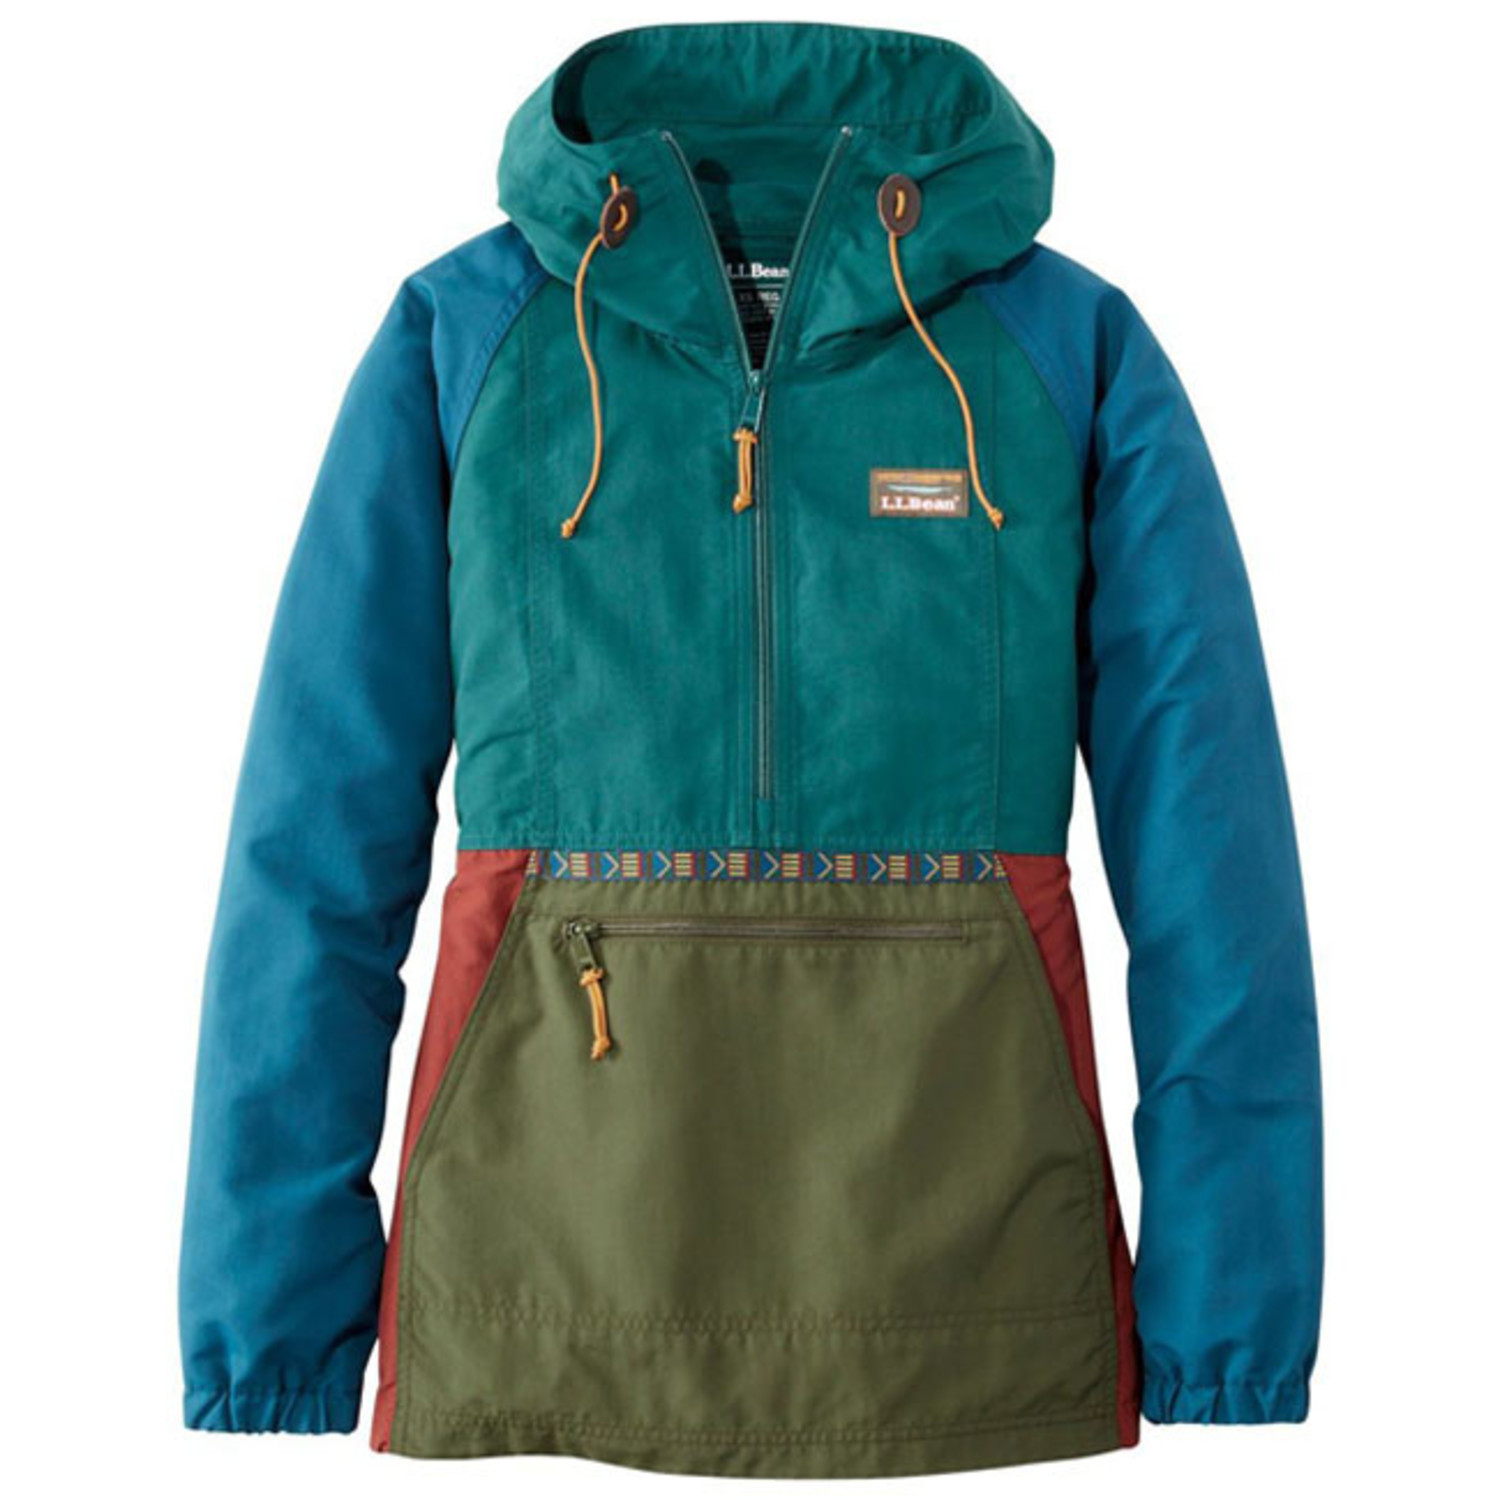 Ll Bean Anorak Jacket Factory Sale, UP TO 55% OFF | www 